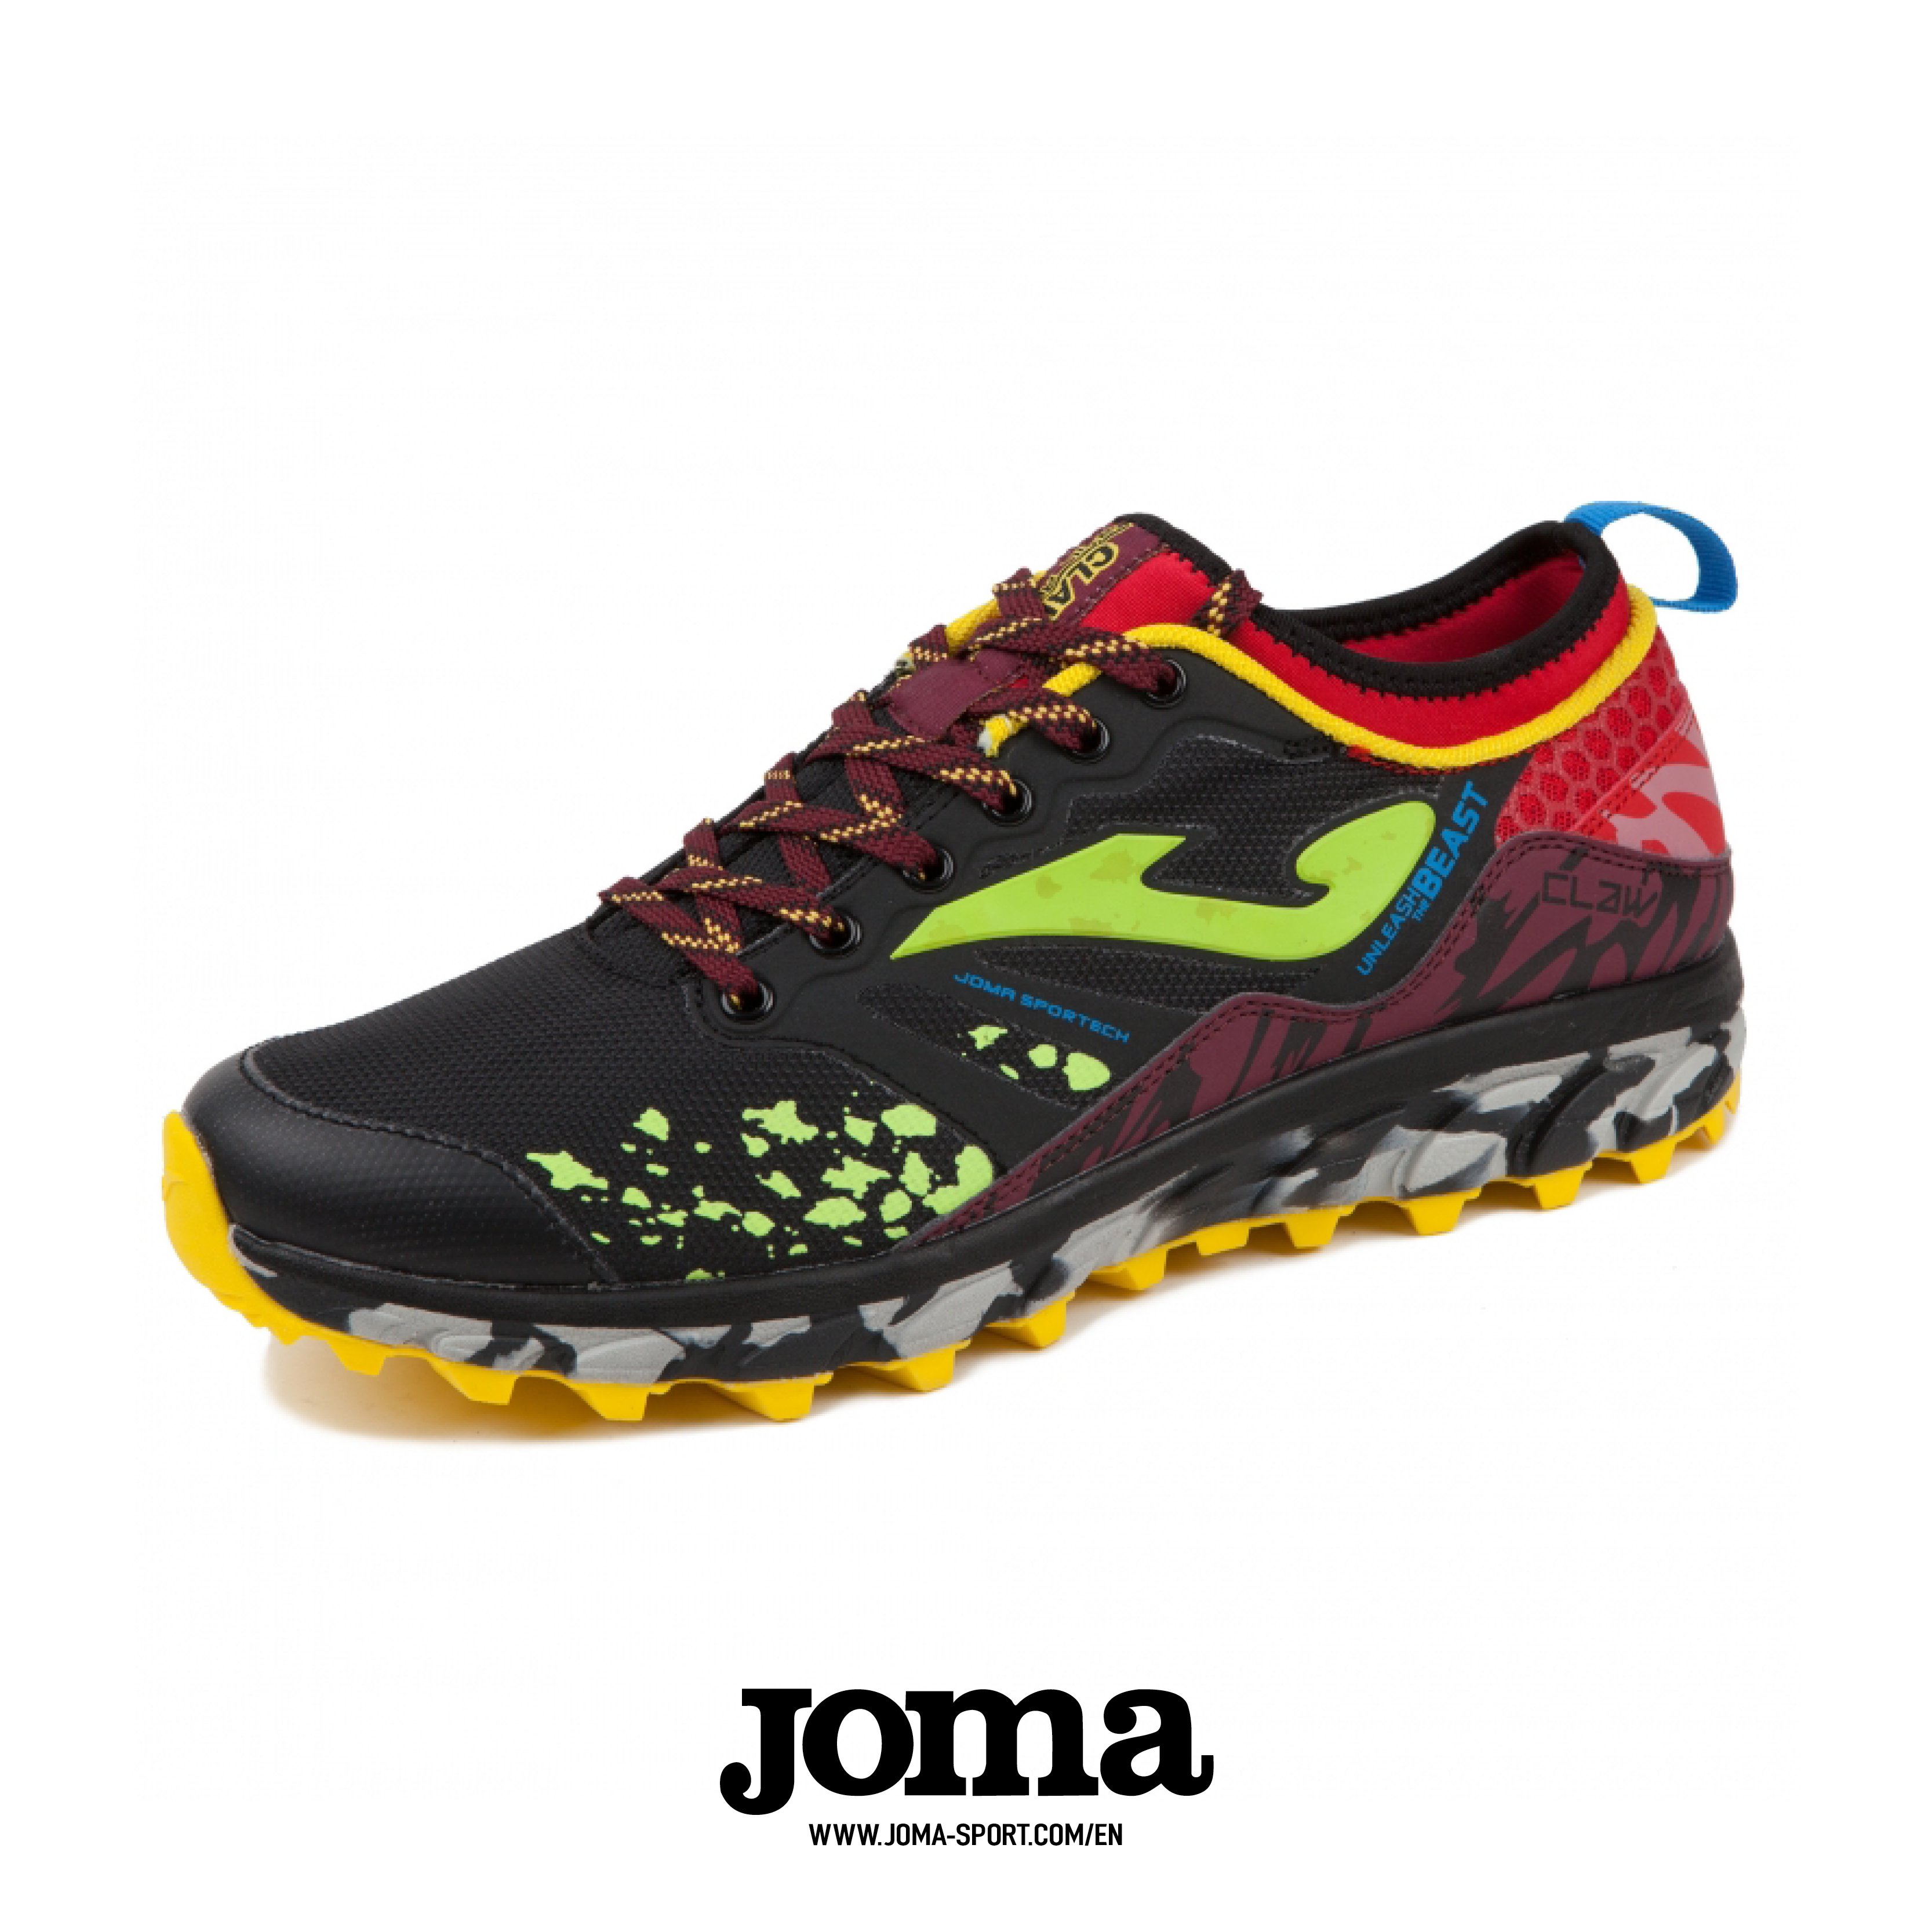 Joma Sport UK on Twitter: "Joma presents the new Claw trek shoes. Available in mens and women styles a variety of different colours. Contact your local specialist for more details. #JomaUK